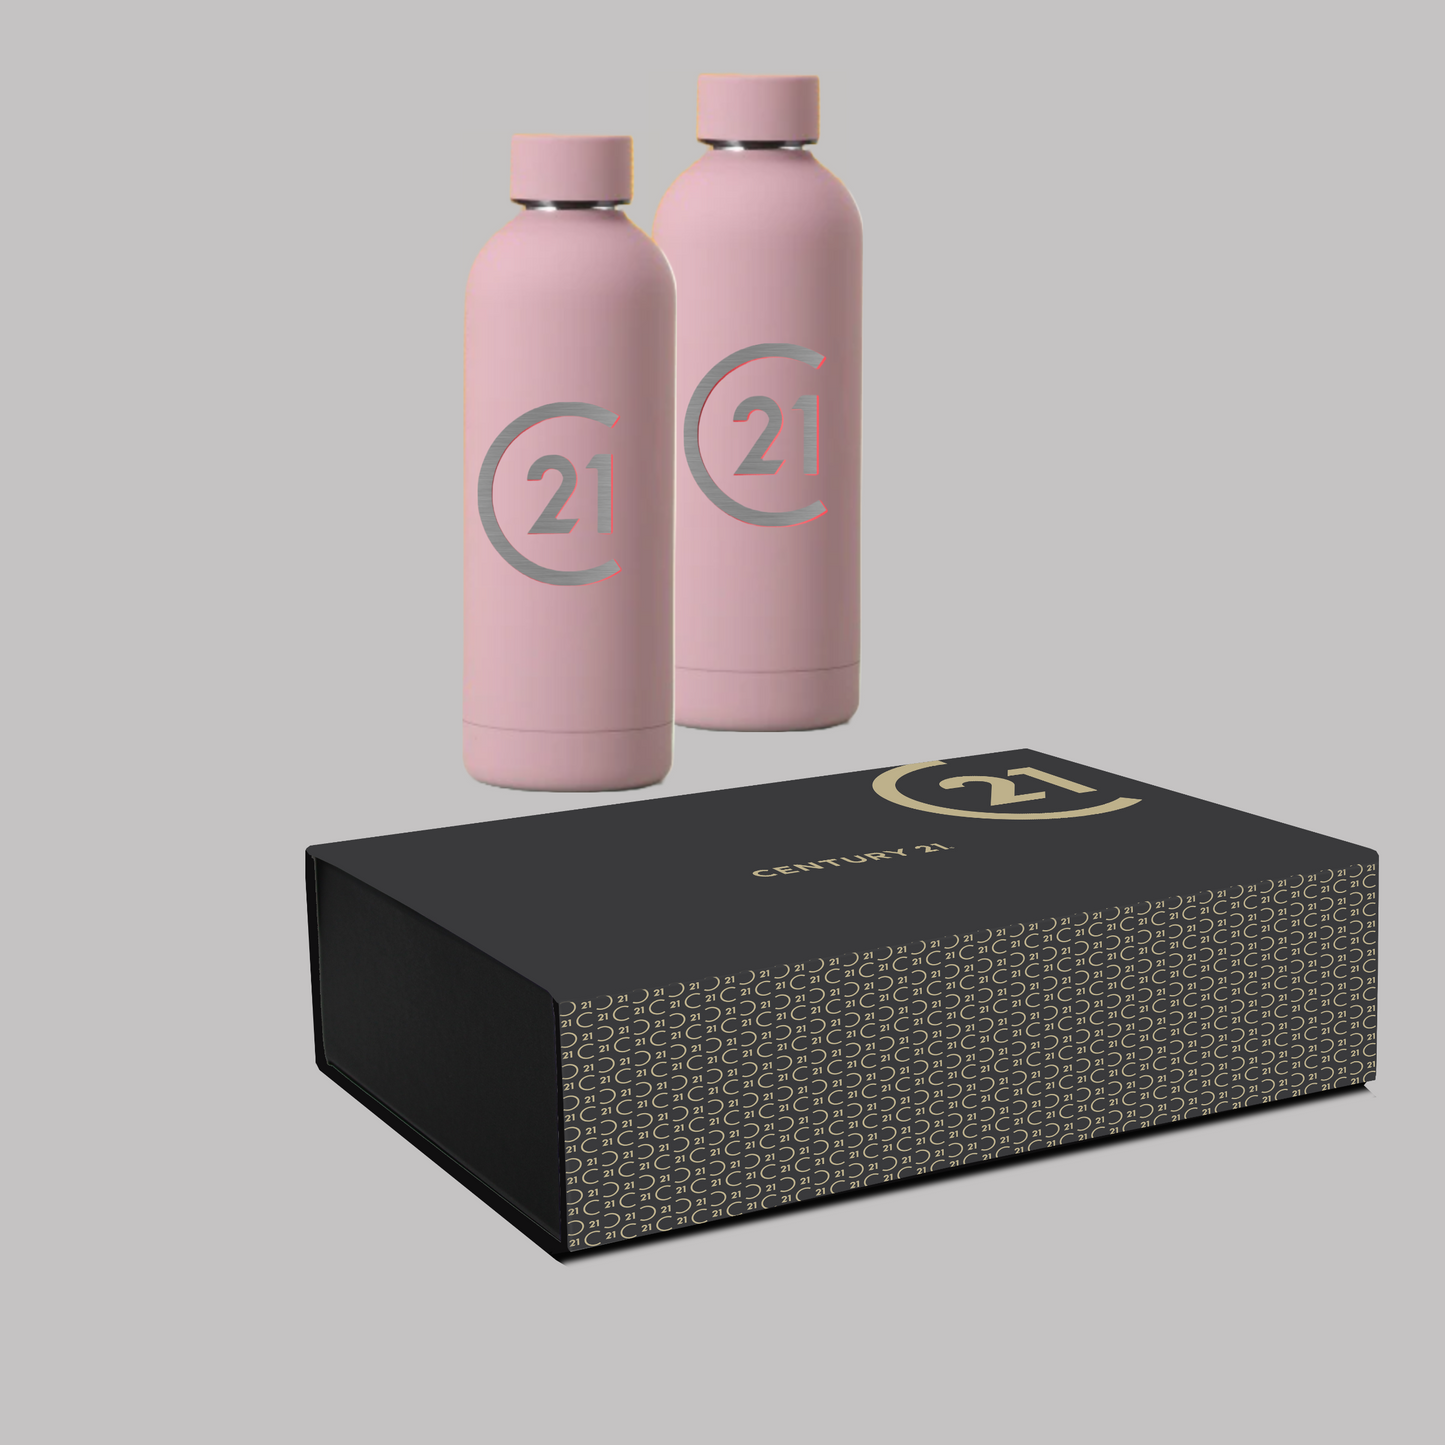 C21 Water Bottles in Century 21 Closing Gift Box (from $58 per complete box)